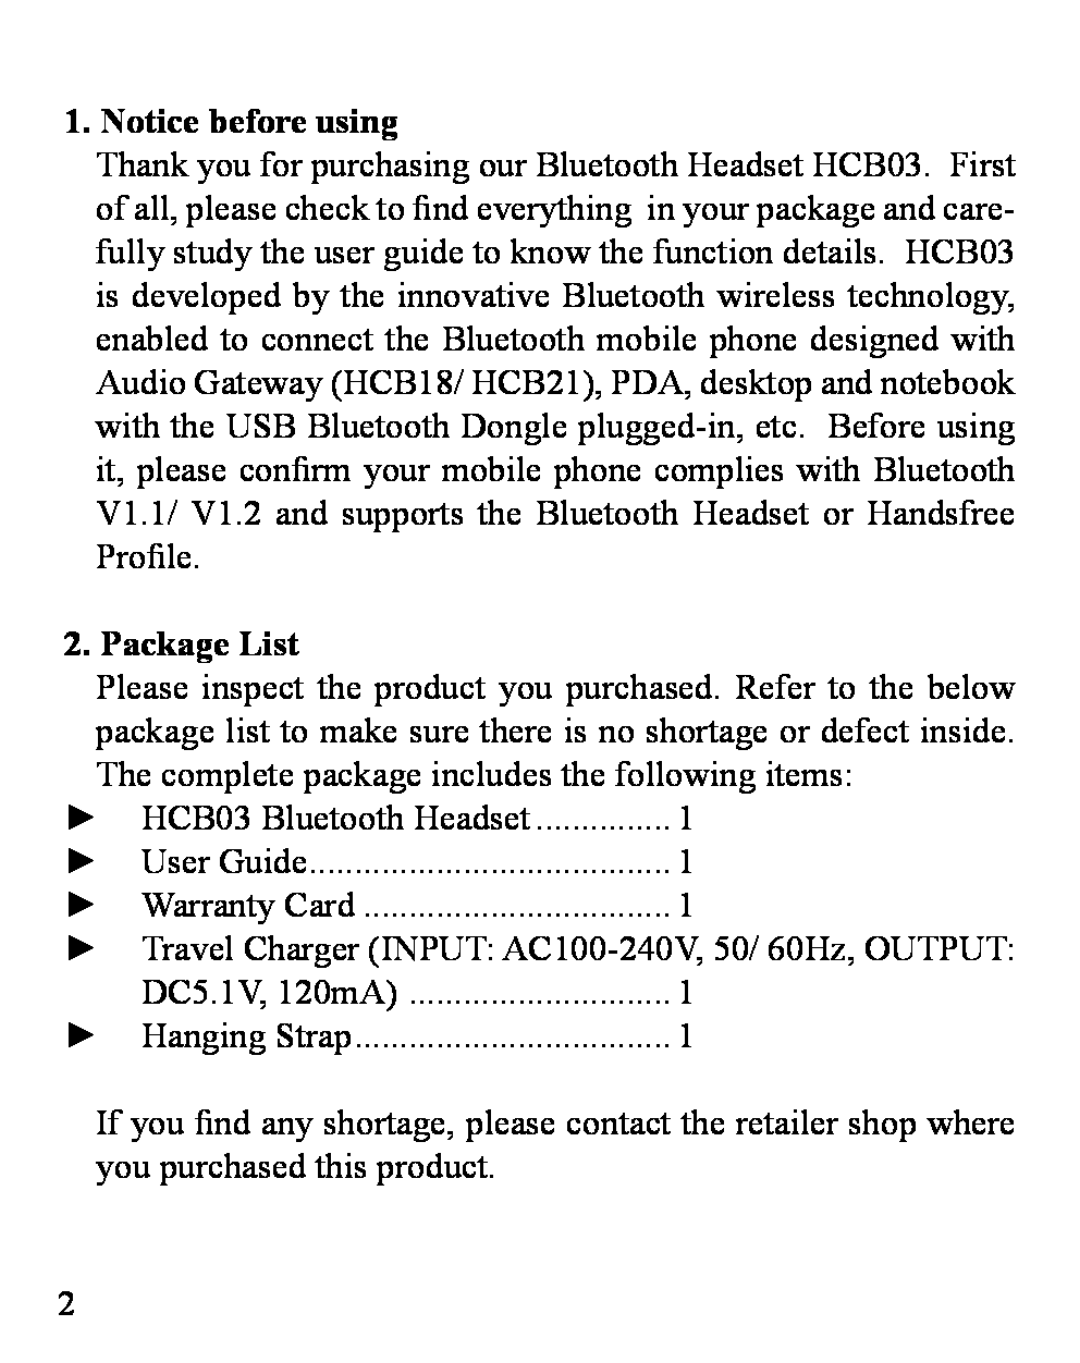 Huey Chiao HCB03 manual Notice before using, Package List 